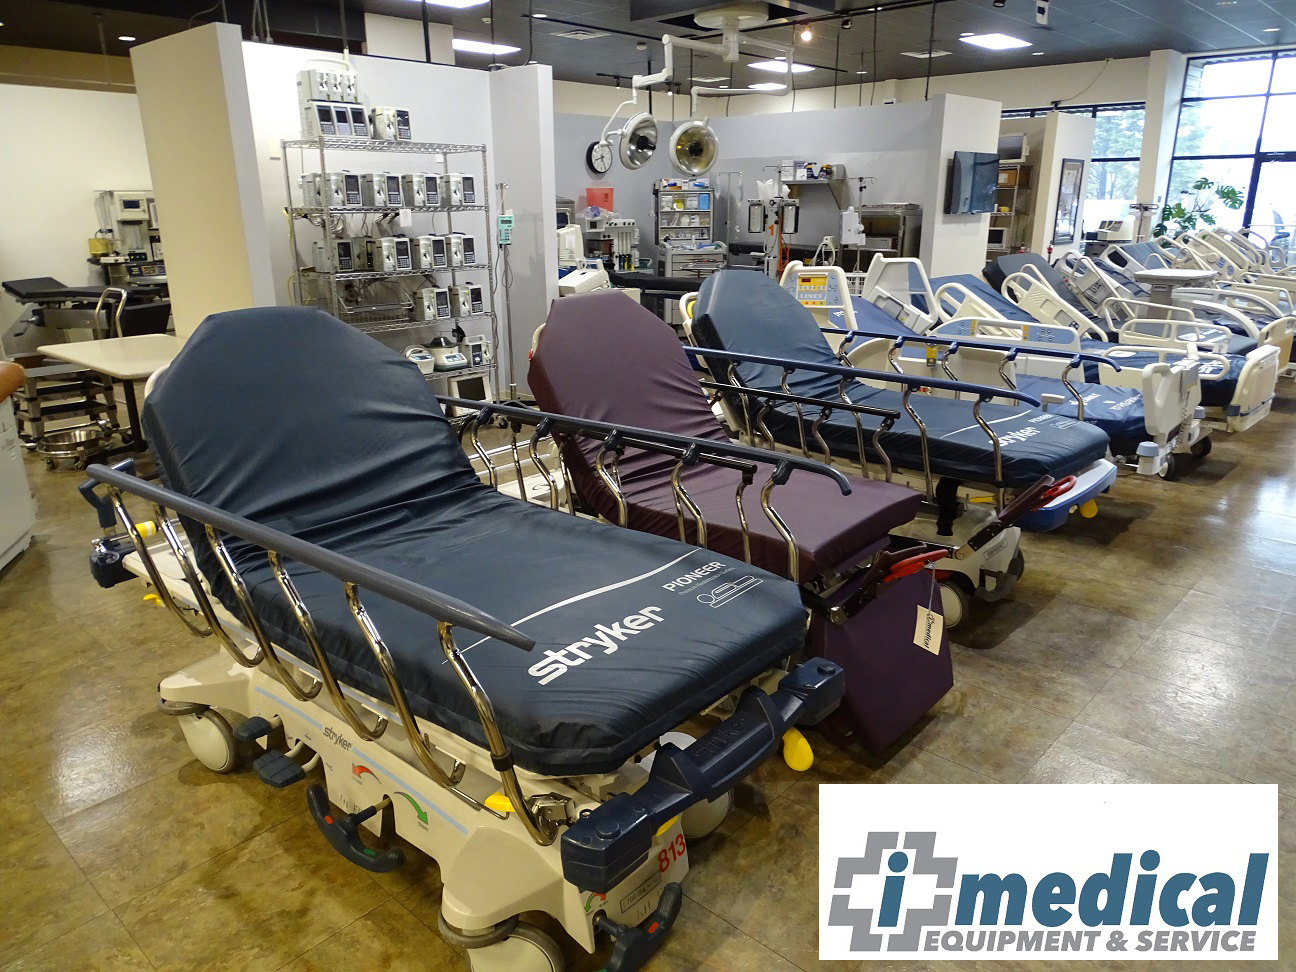 Used Hospital Medical Equipment for Sale 